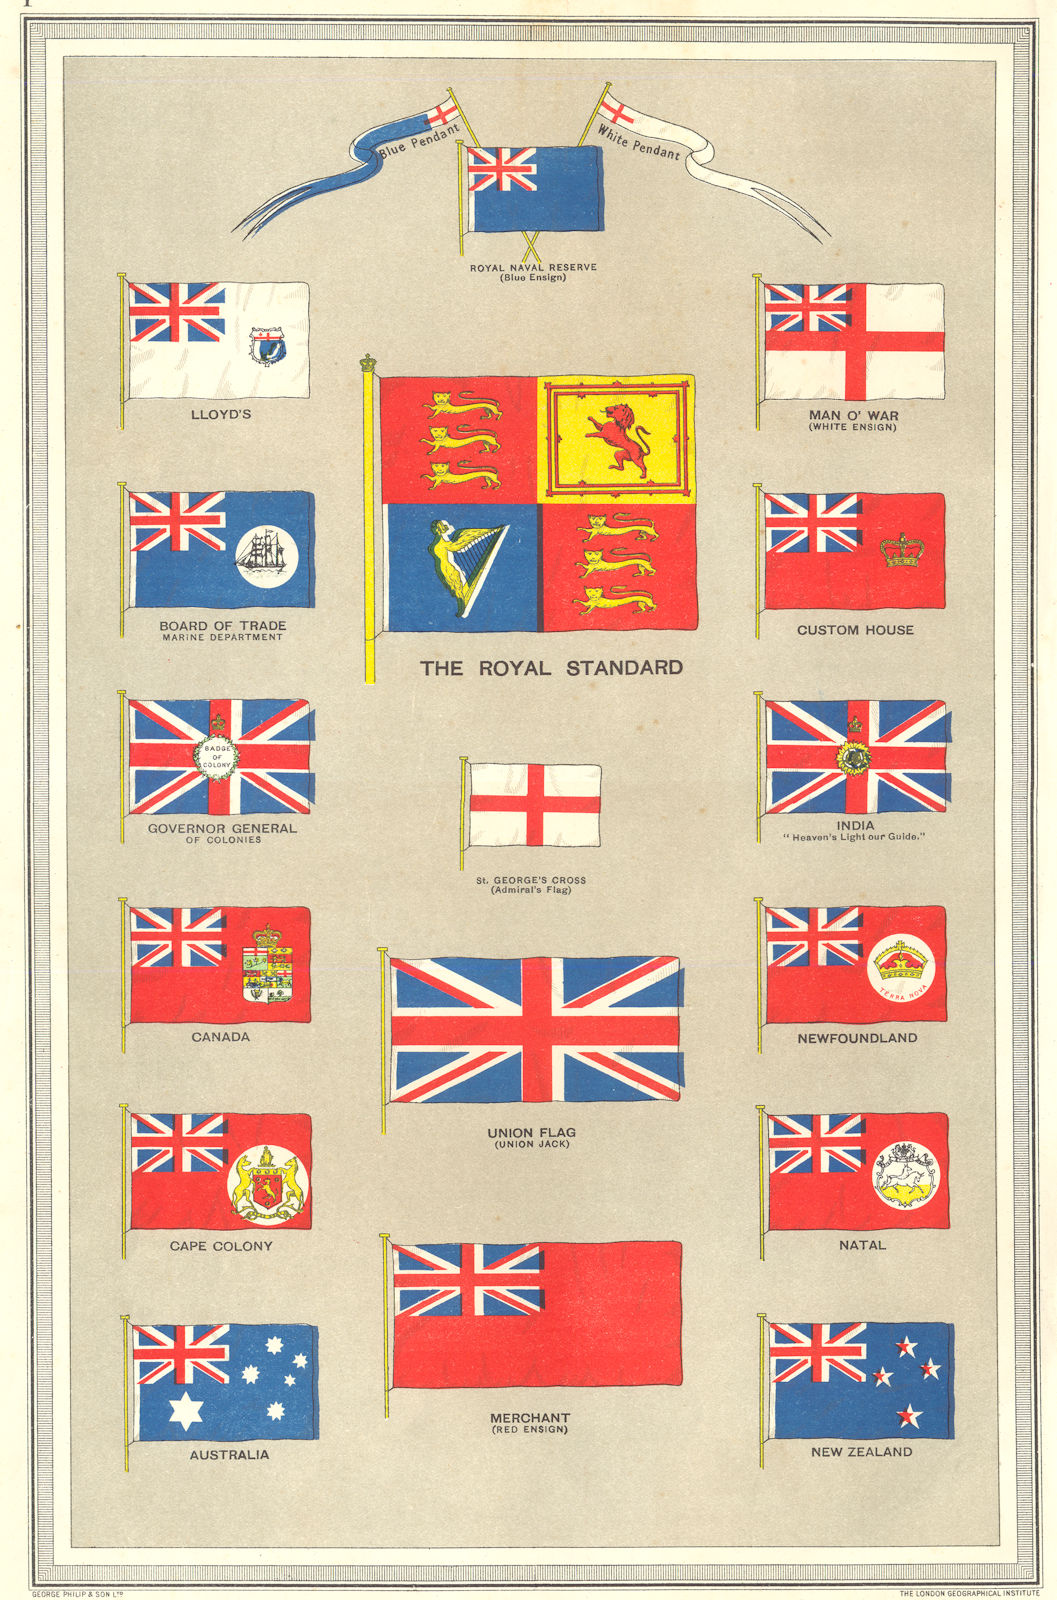 Associate Product BRITISH EMPIRE FLAGS. Union Jack Red White Ensign Lloyd's Royal Standard 1907